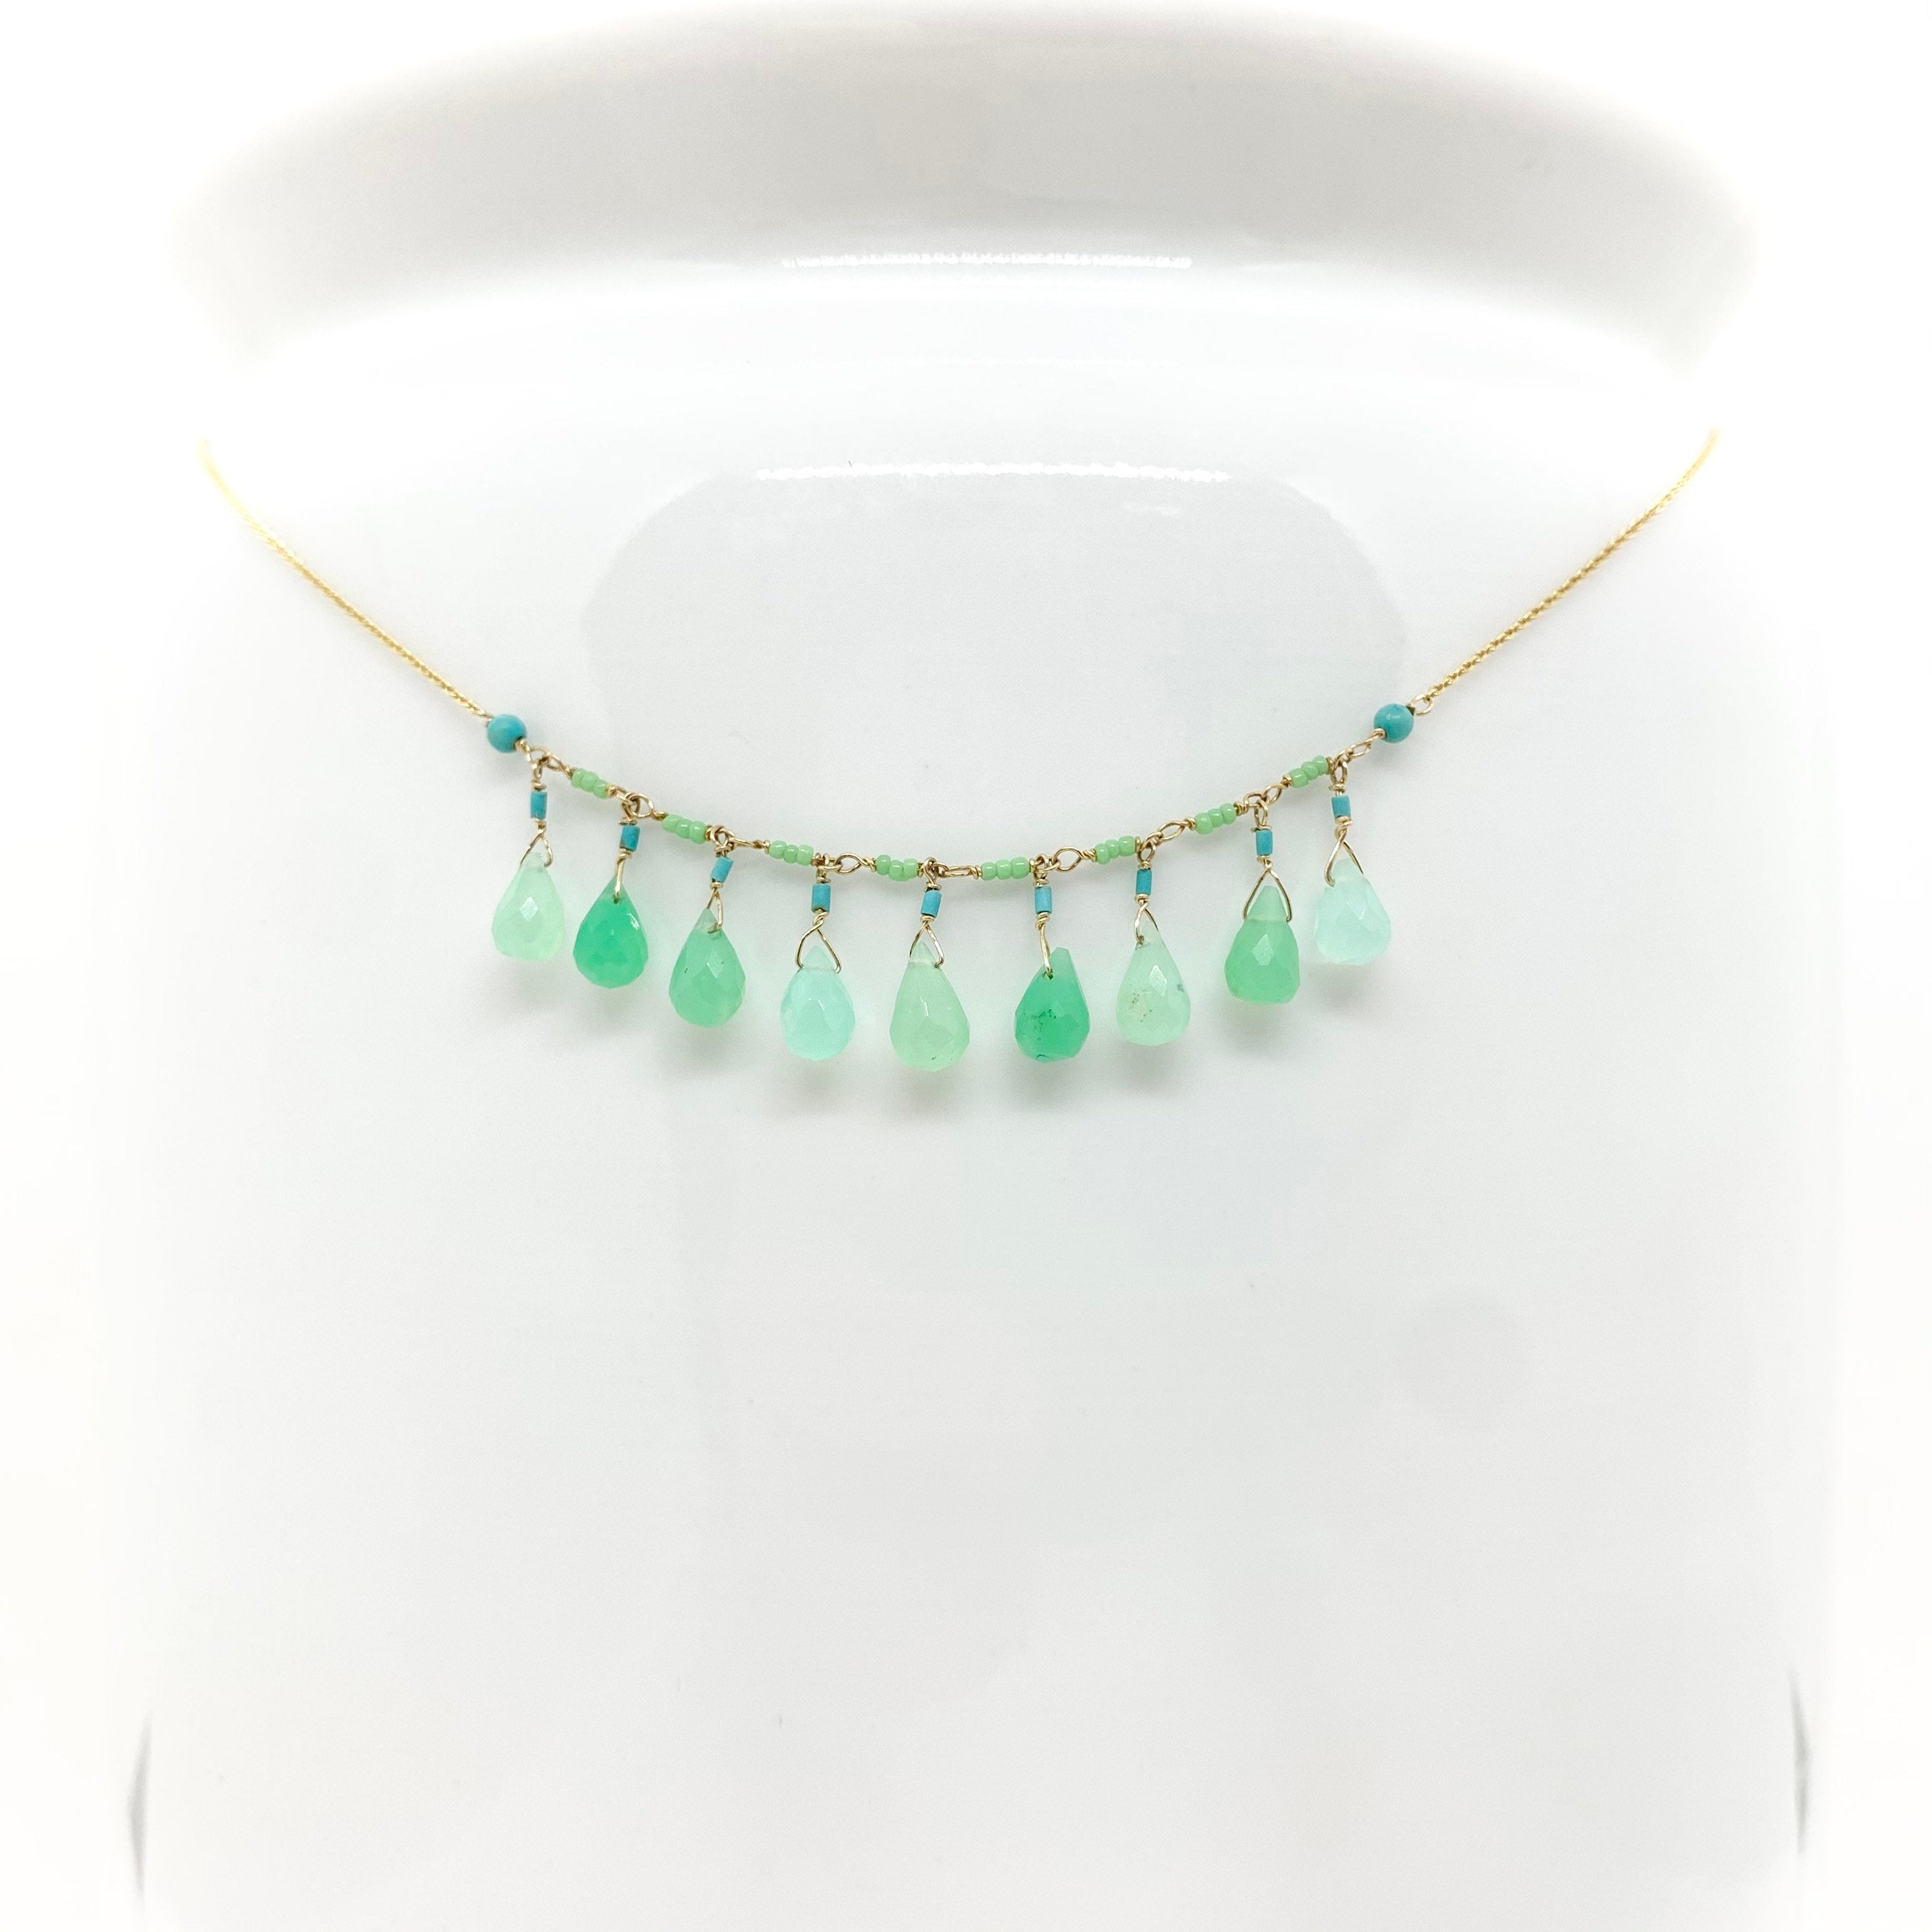 14k Gold Chain Necklace w/ Chrysoprase, Turquoise & Antique Italian Beads